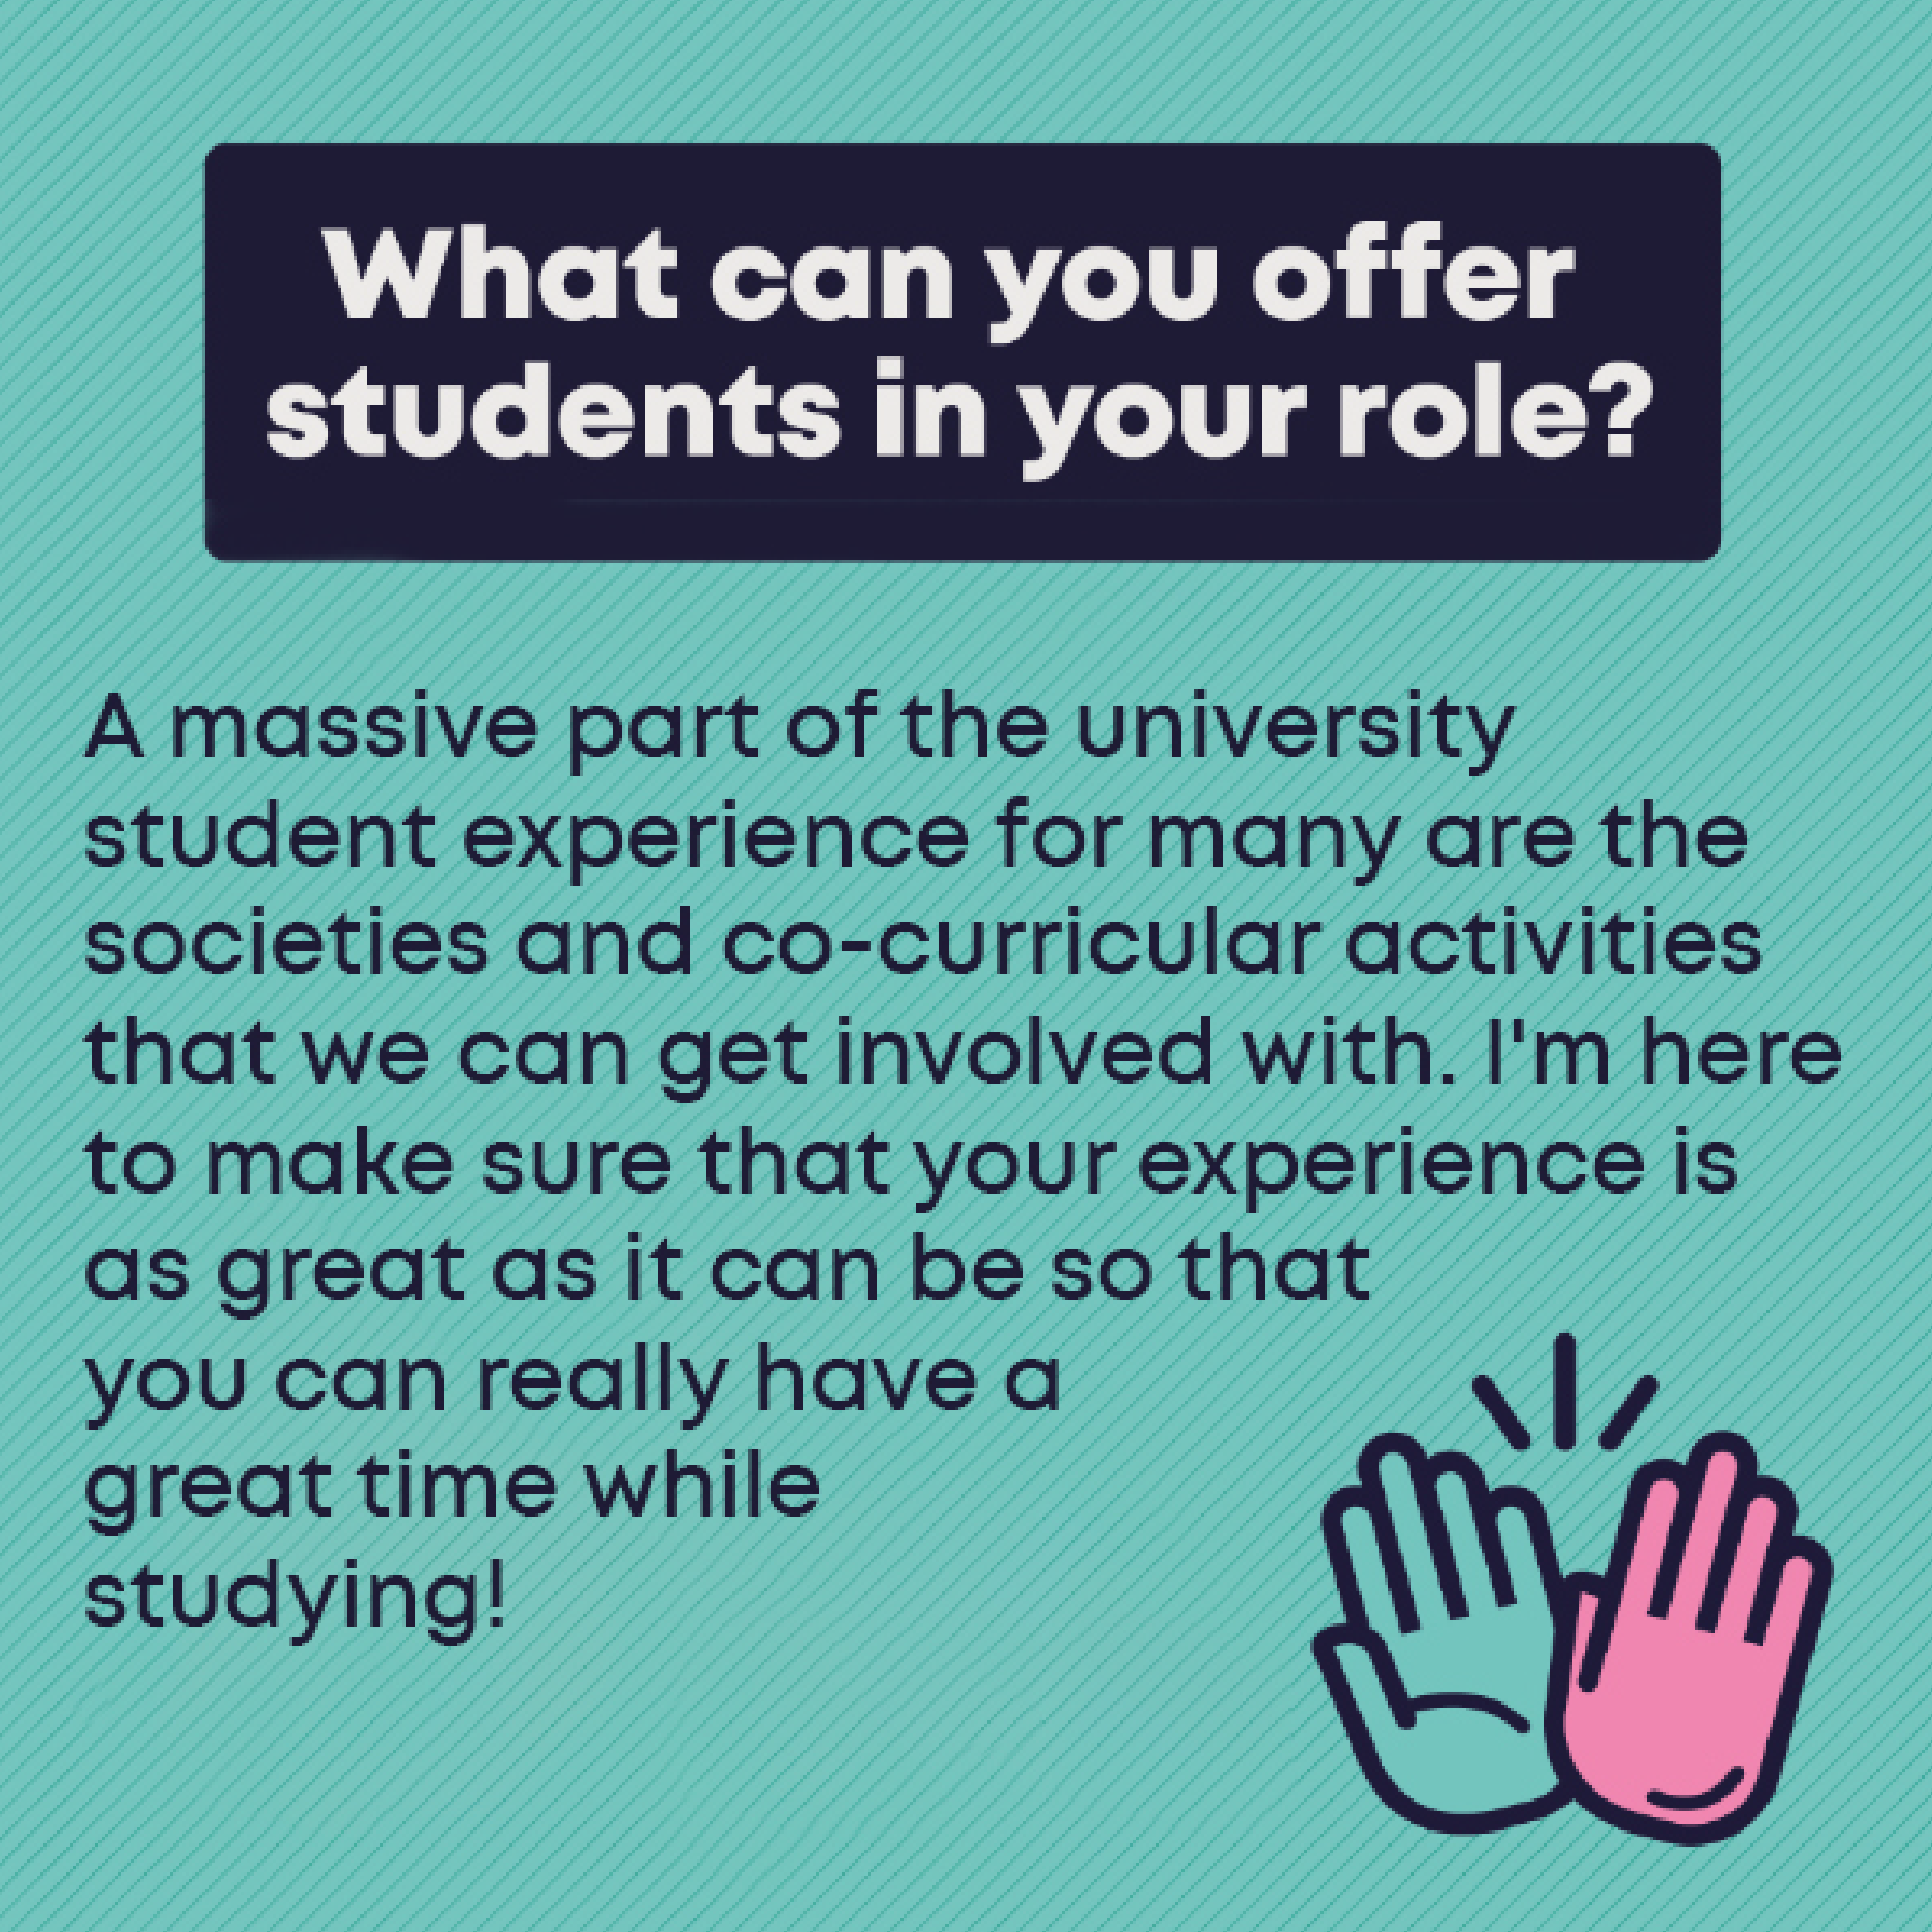 What can you offer students in your role?    A massive part of the university student experience for many are the societies and co-curricular activities that we can get involved with. I'm here to make sure that your experience is as great as it can be so that you can really have a great time while studying!